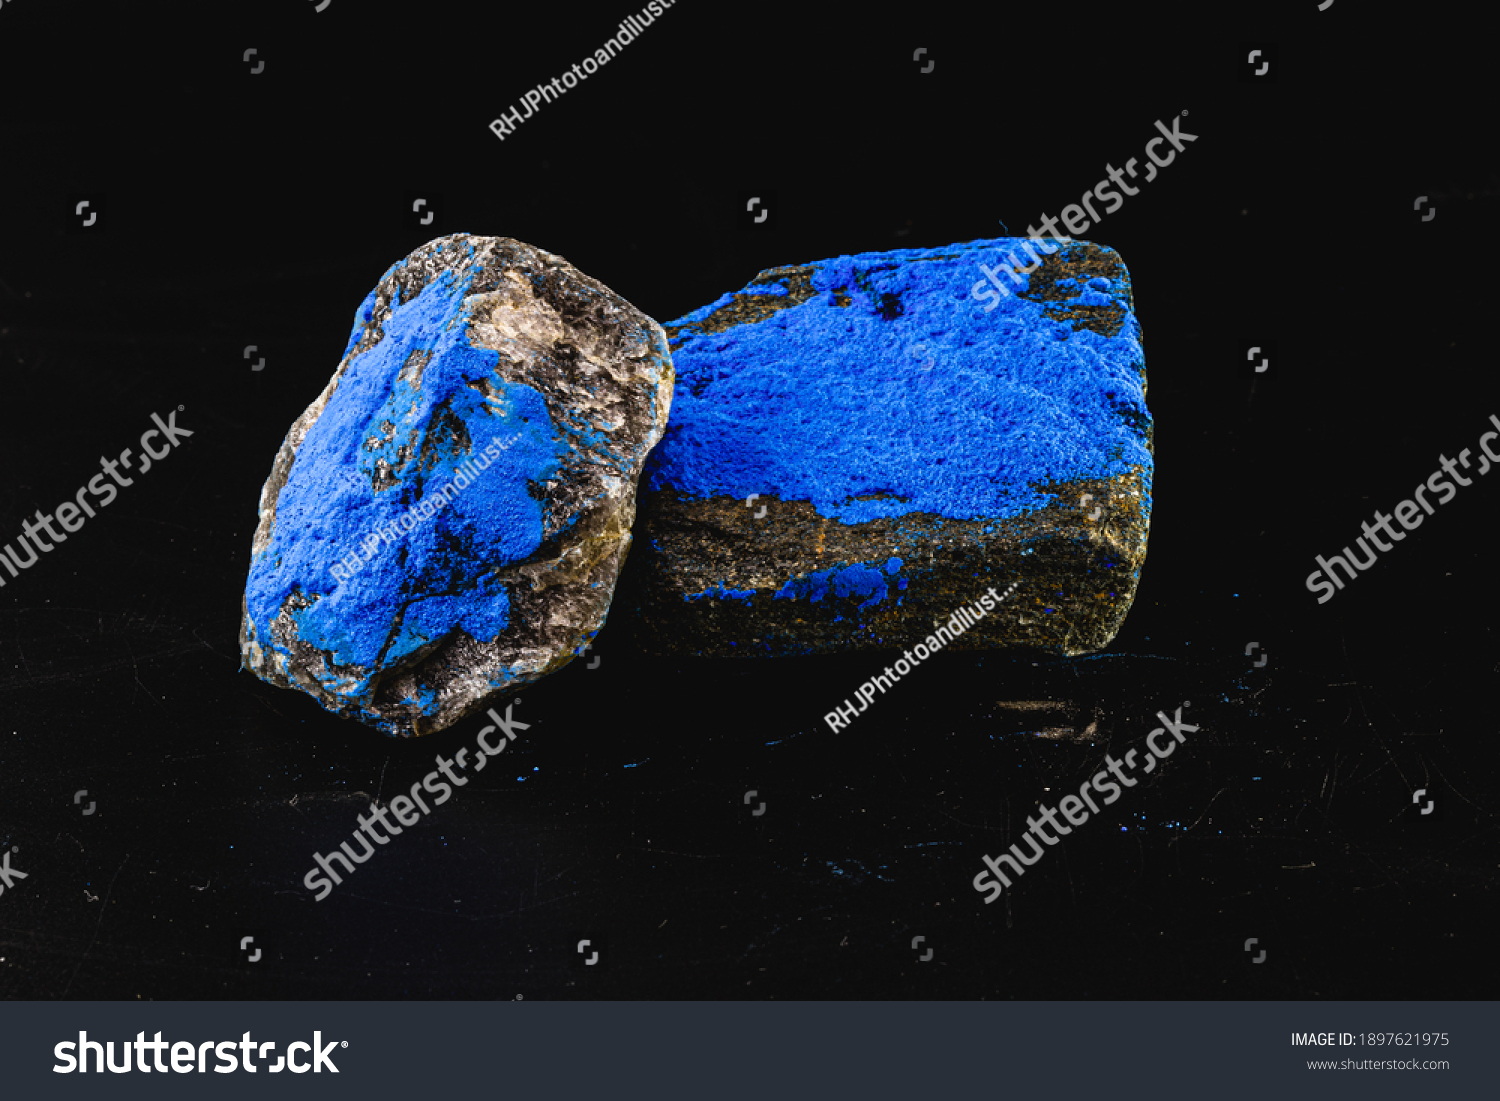 Cobalt is a chemical element present in the enameled mineral, blue pigment for industrial use #1897621975